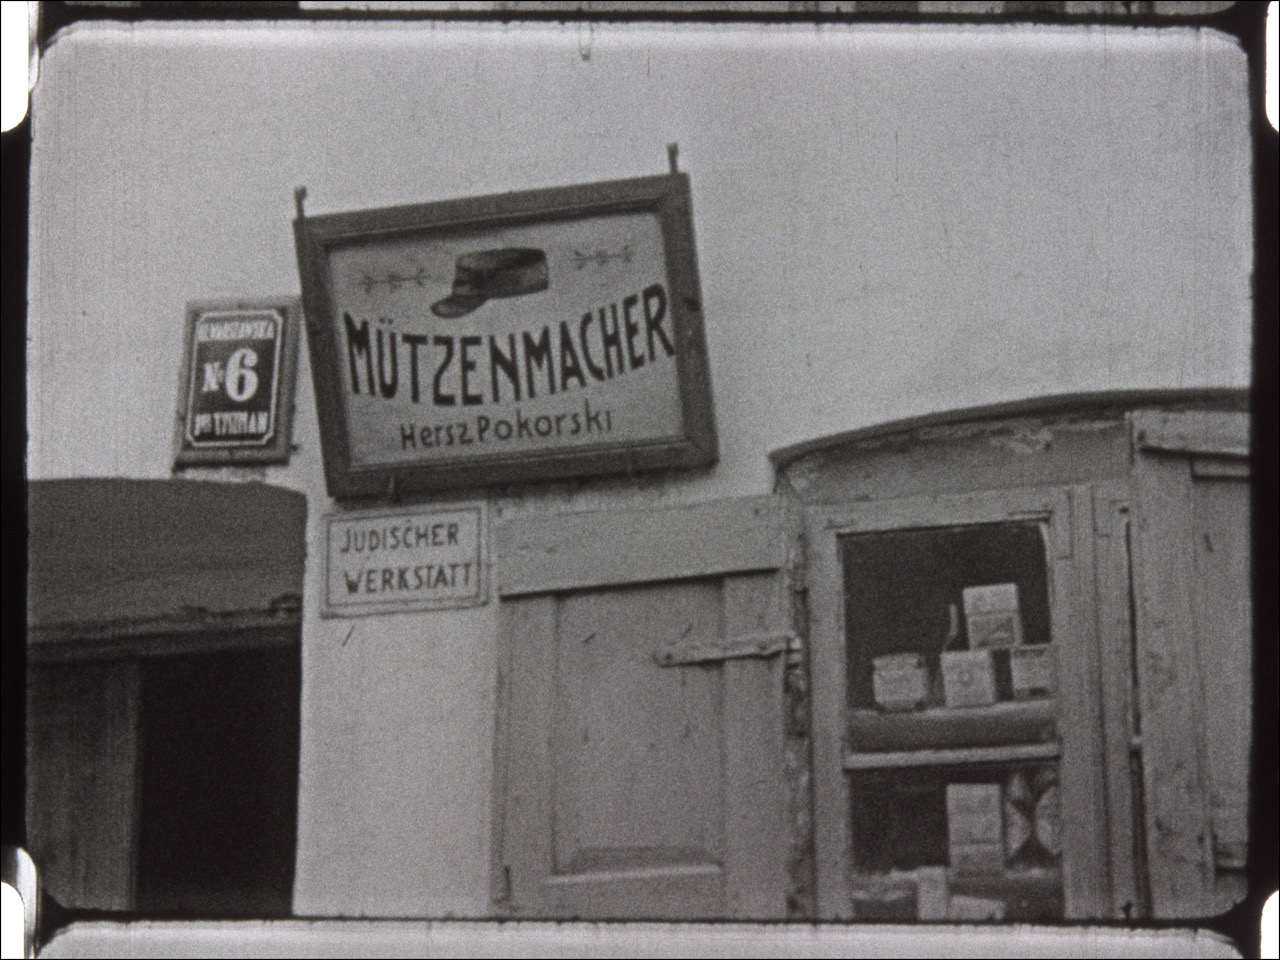 This event poster shows a film still depicting the front of the store of a Jewish hatter in the Nazi Province of East Prussia